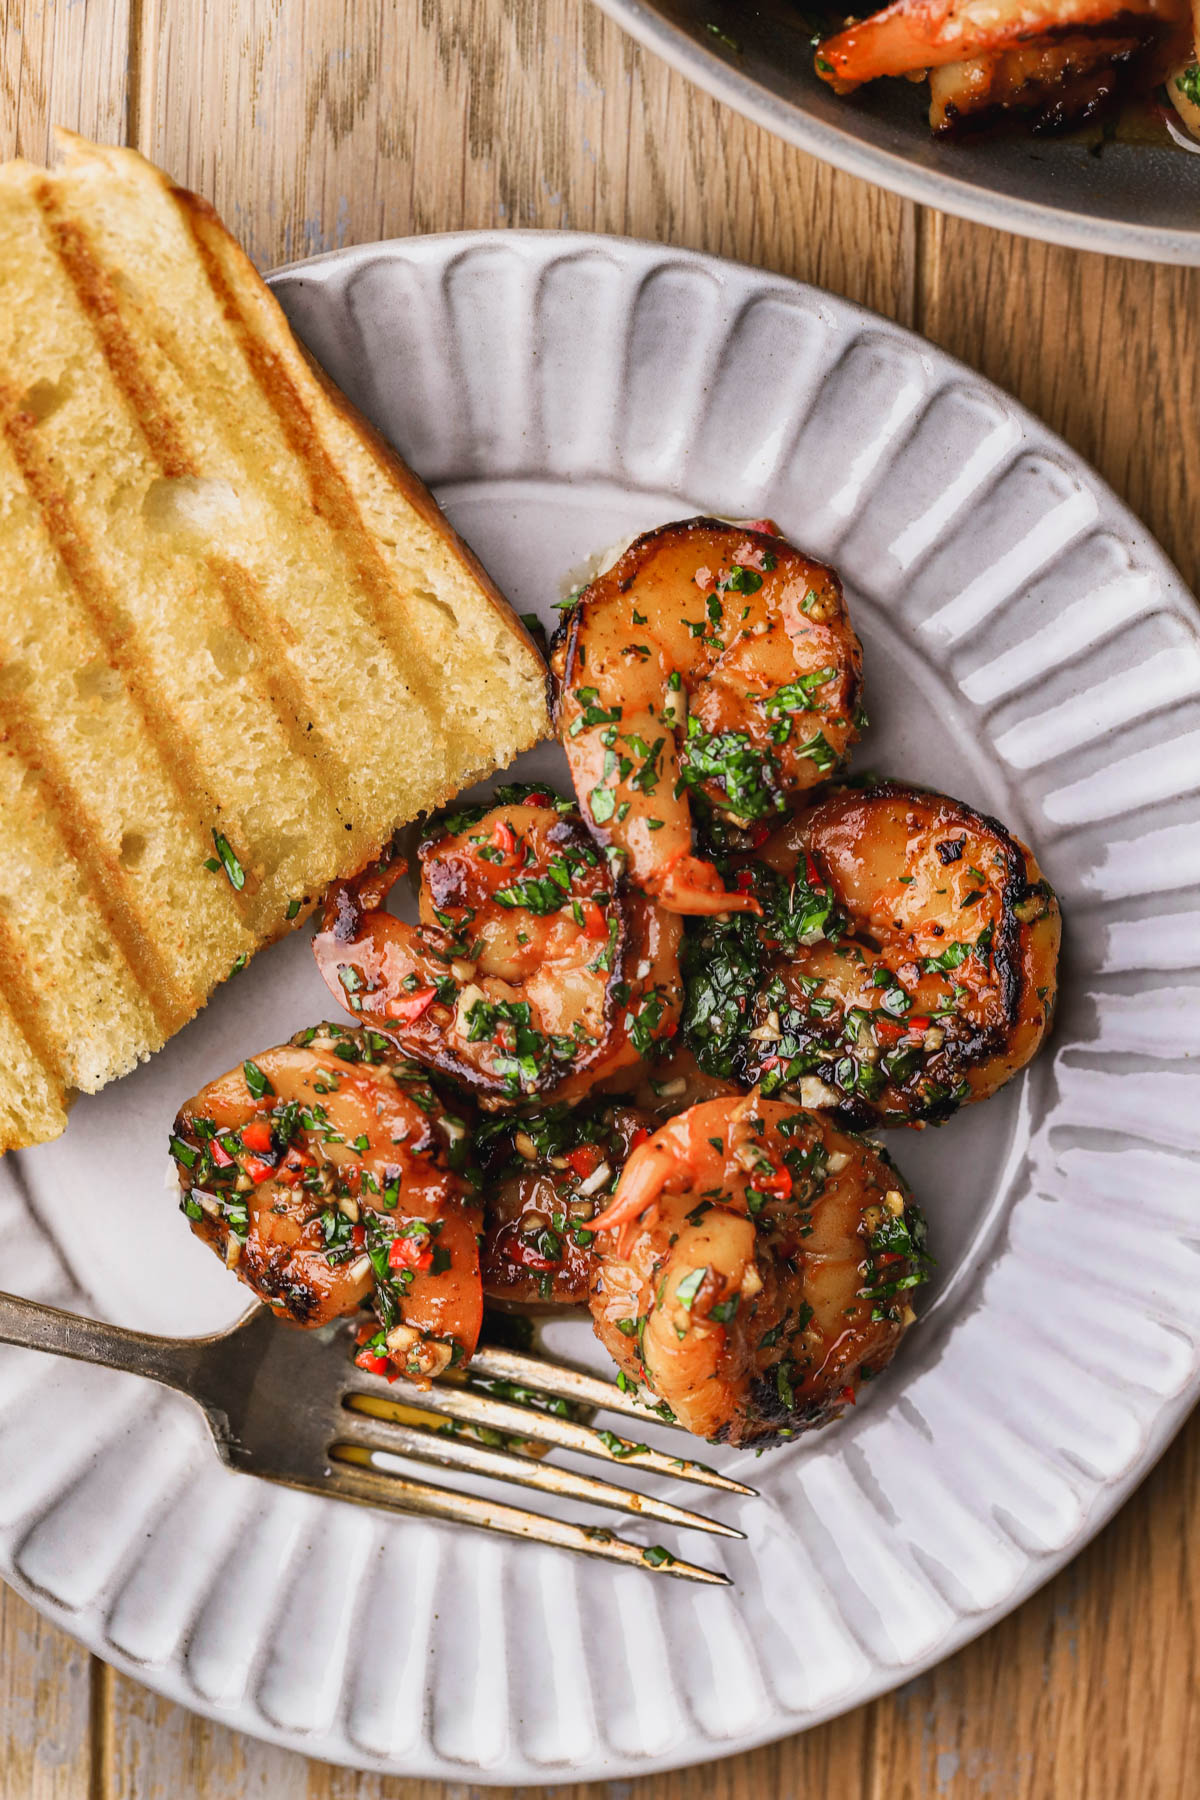 Seared shrimp tossed with chimichurri sauce and grilled bread.  